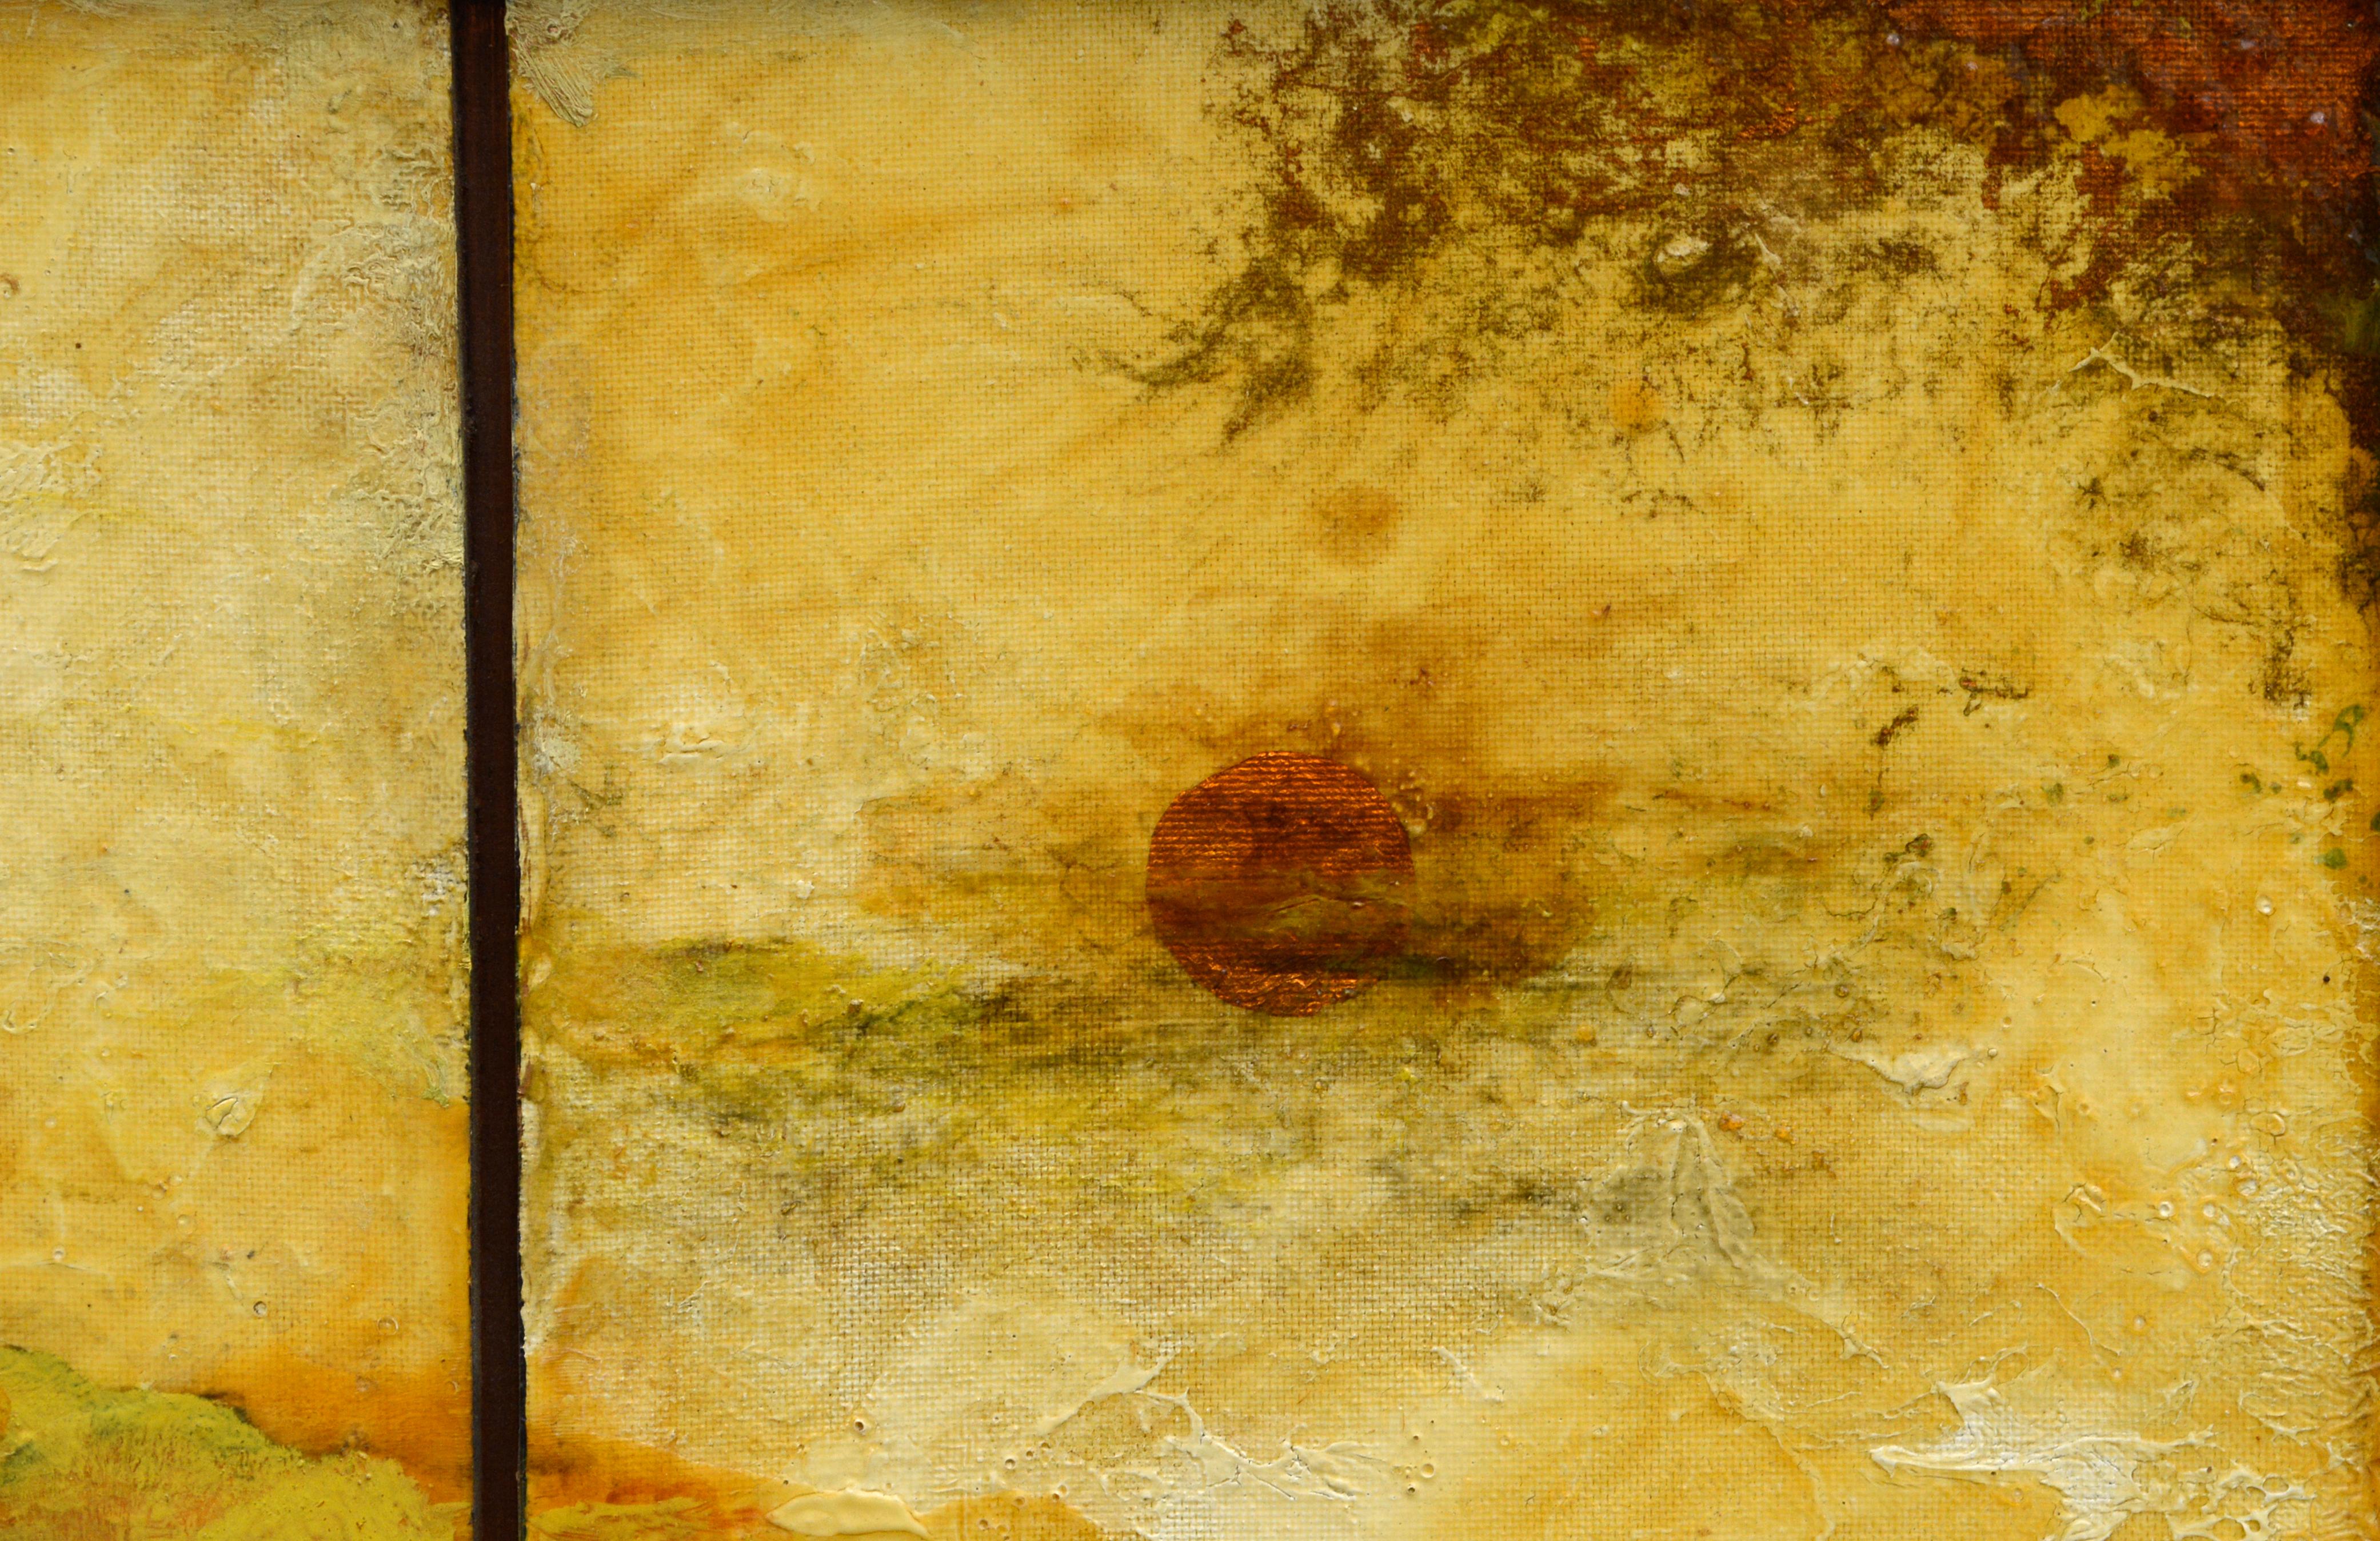 Landscape triptych with heavy colored varnish and natural materials by an unknown artist (20th Century). Presented in a 